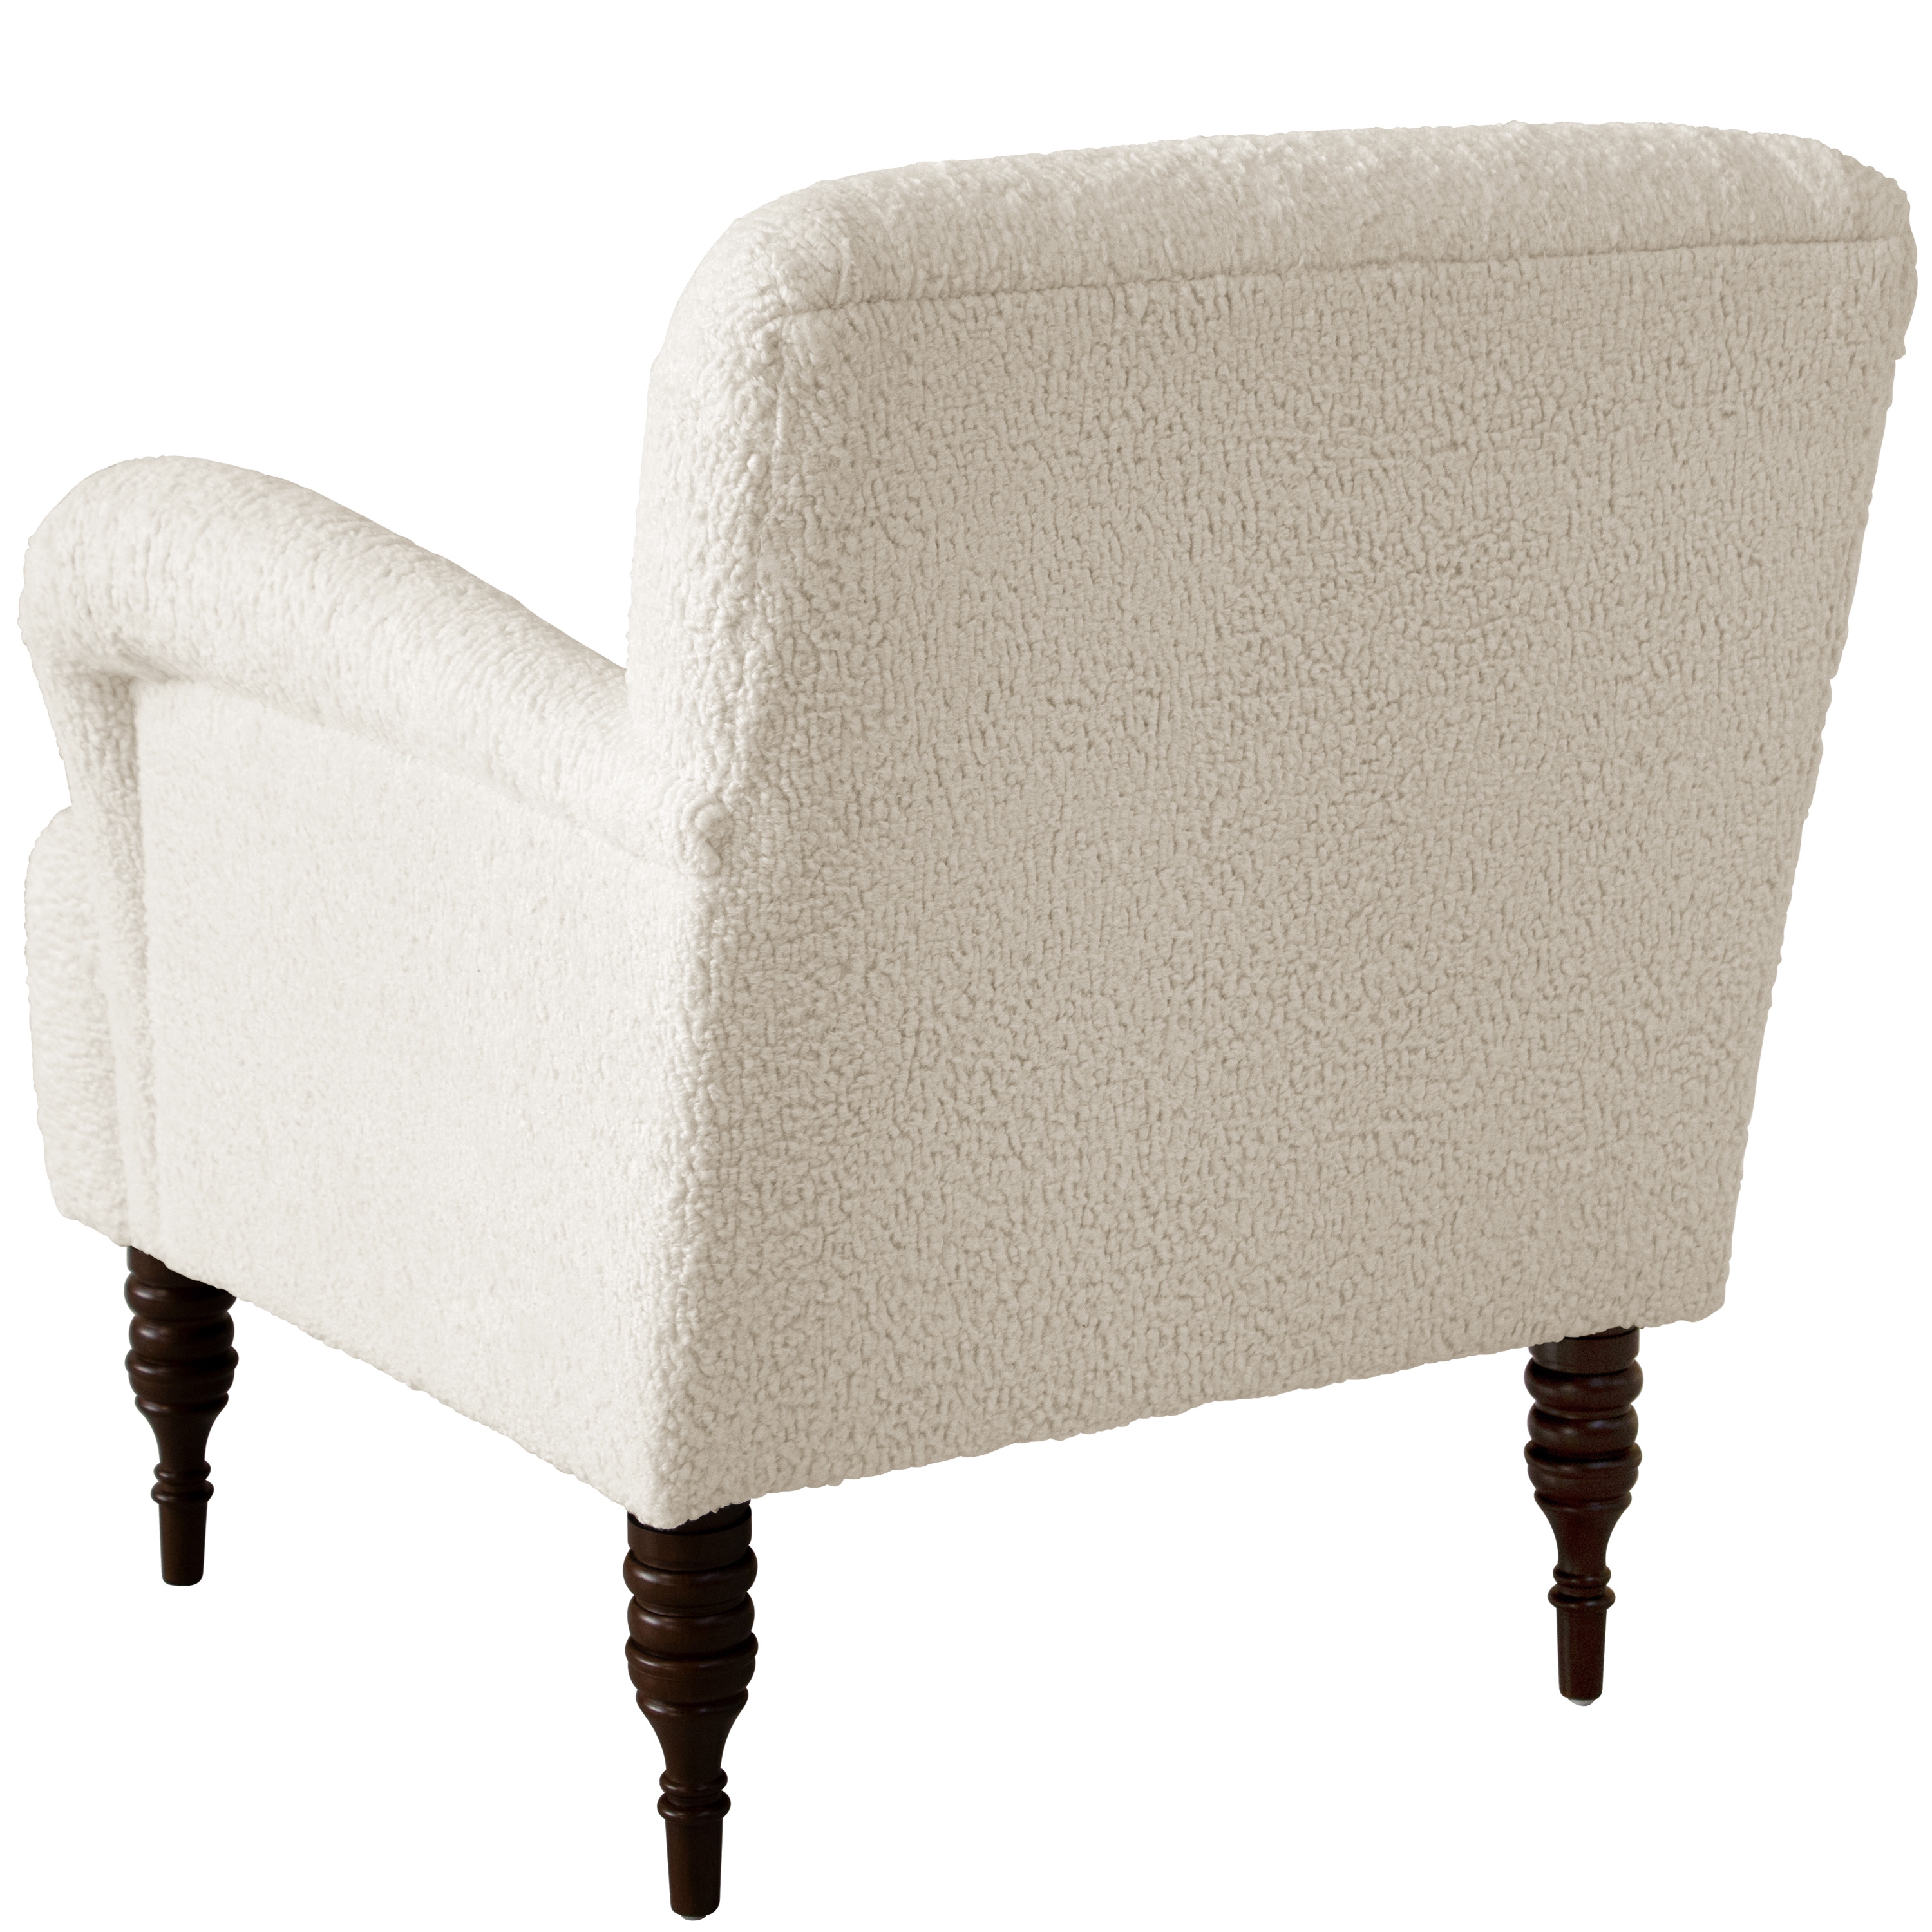 Norwood Chair in Sheepskin Natural - Image 3